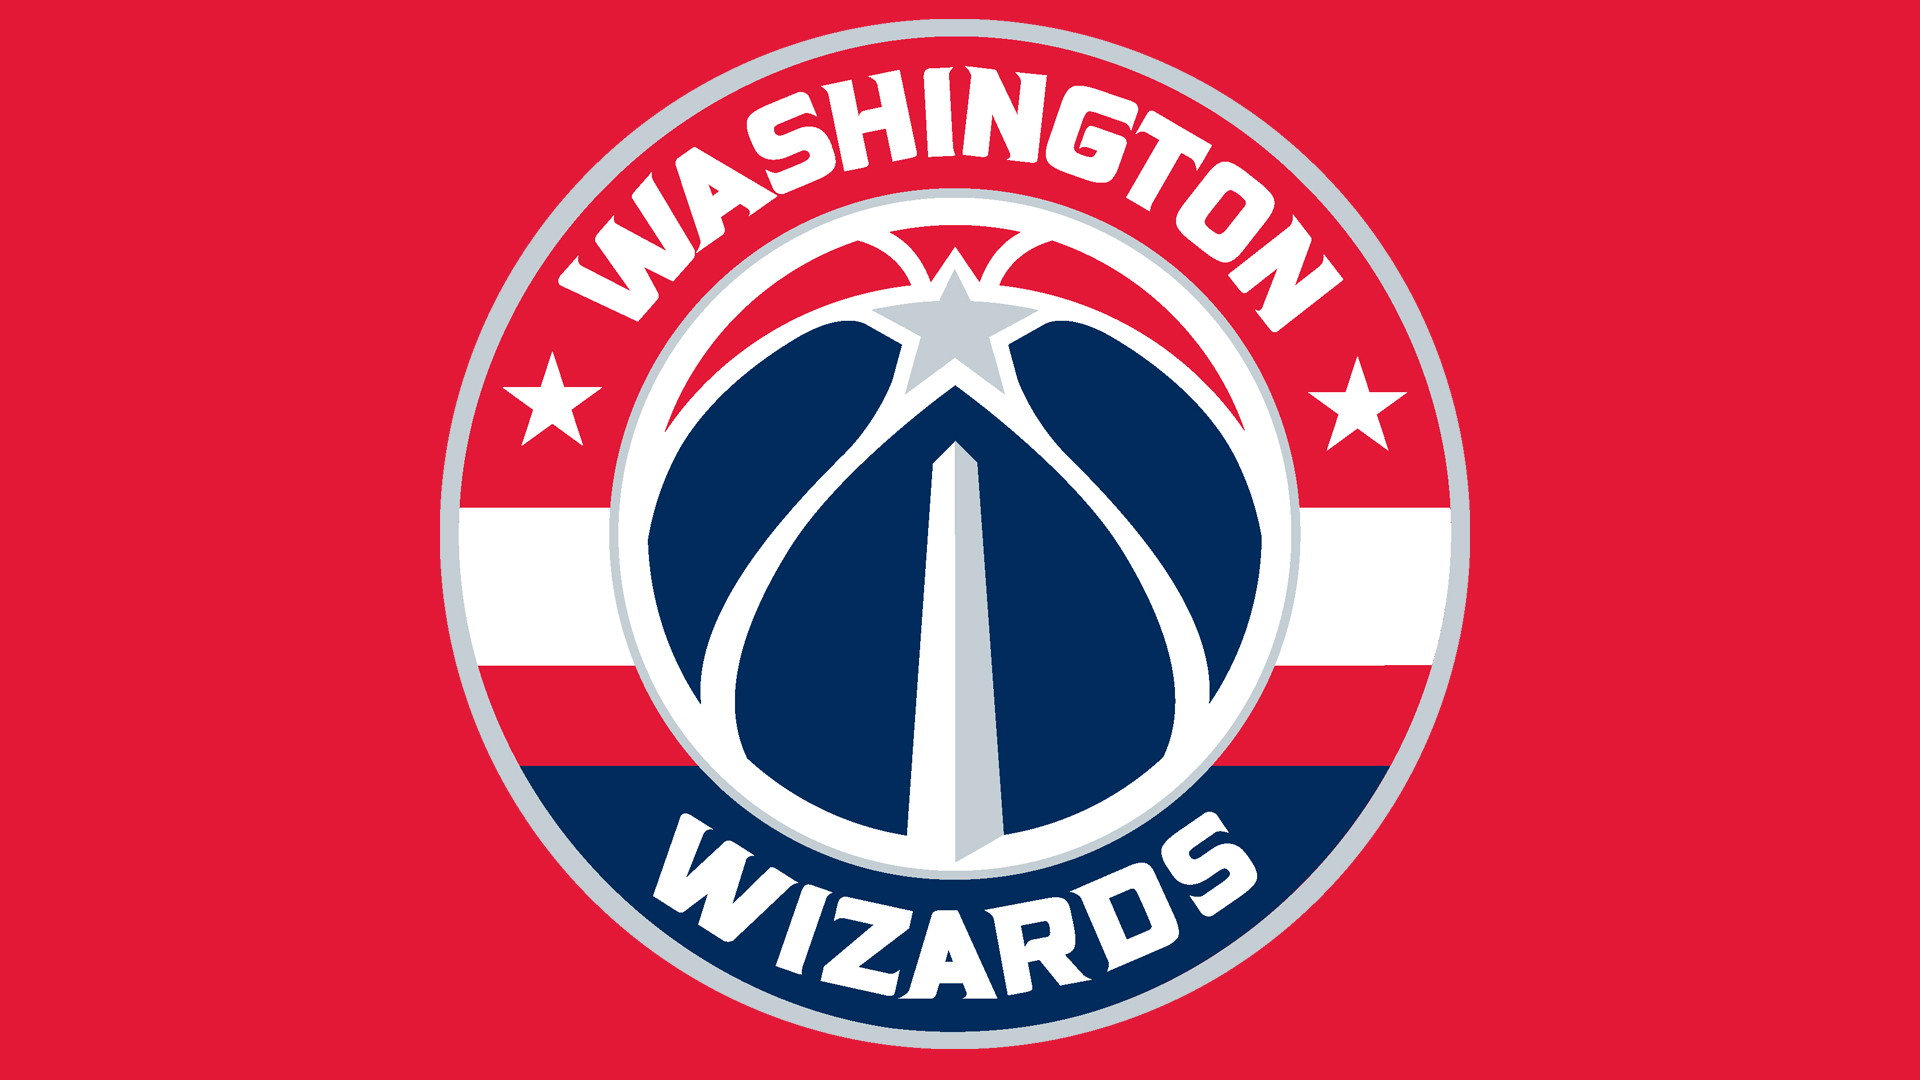 Washington Wizards For PC Wallpaper with high-resolution 1920x1080 pixel. You can use this wallpaper for your Desktop Computer Backgrounds, Windows or Mac Screensavers, iPhone Lock screen, Tablet or Android and another Mobile Phone device